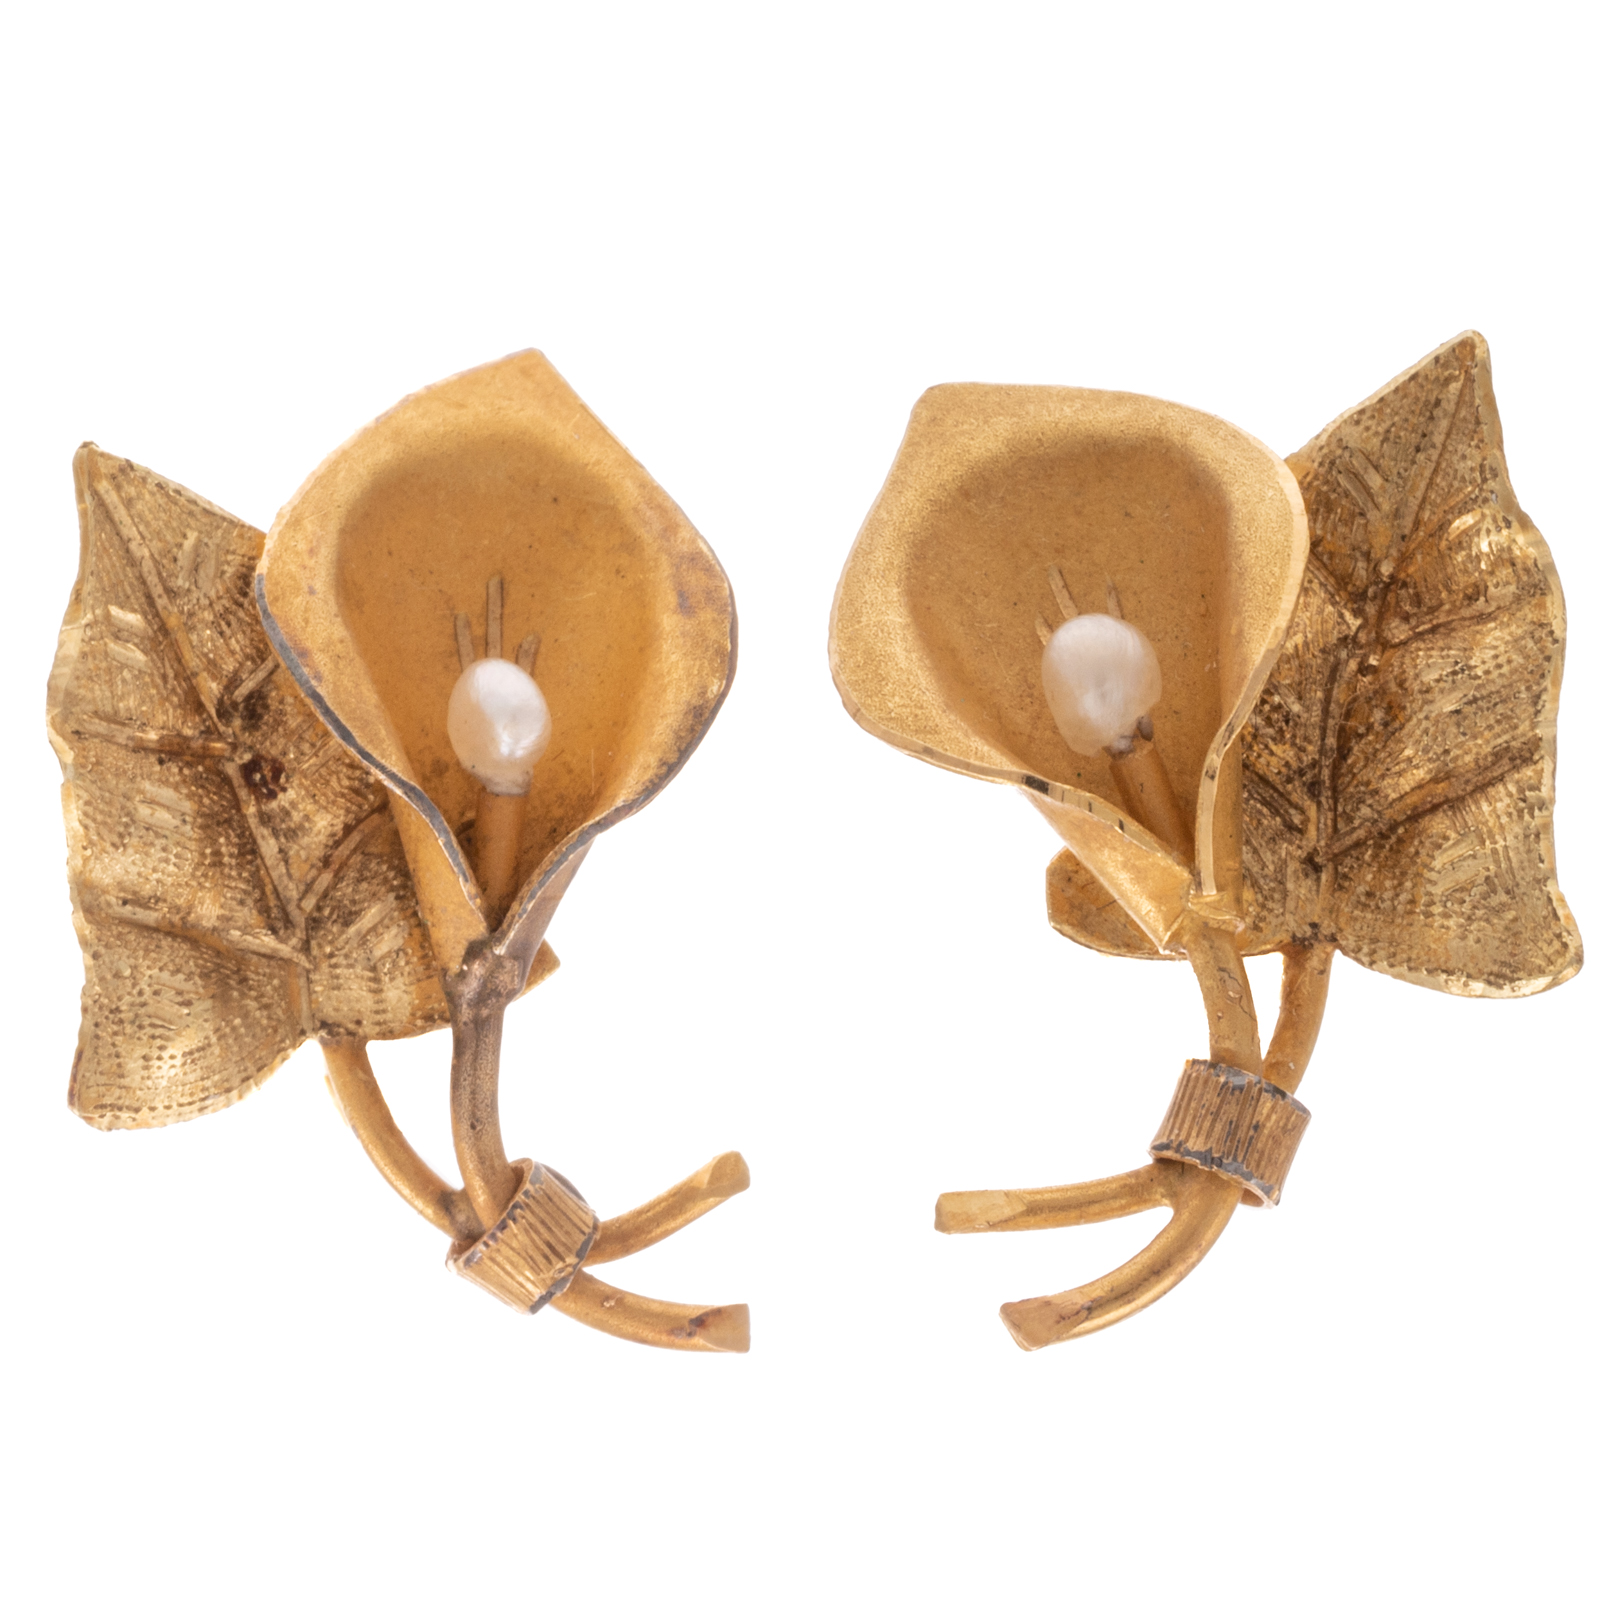 A PAIR OF CALLA LILY EARRINGS IN 2ead89